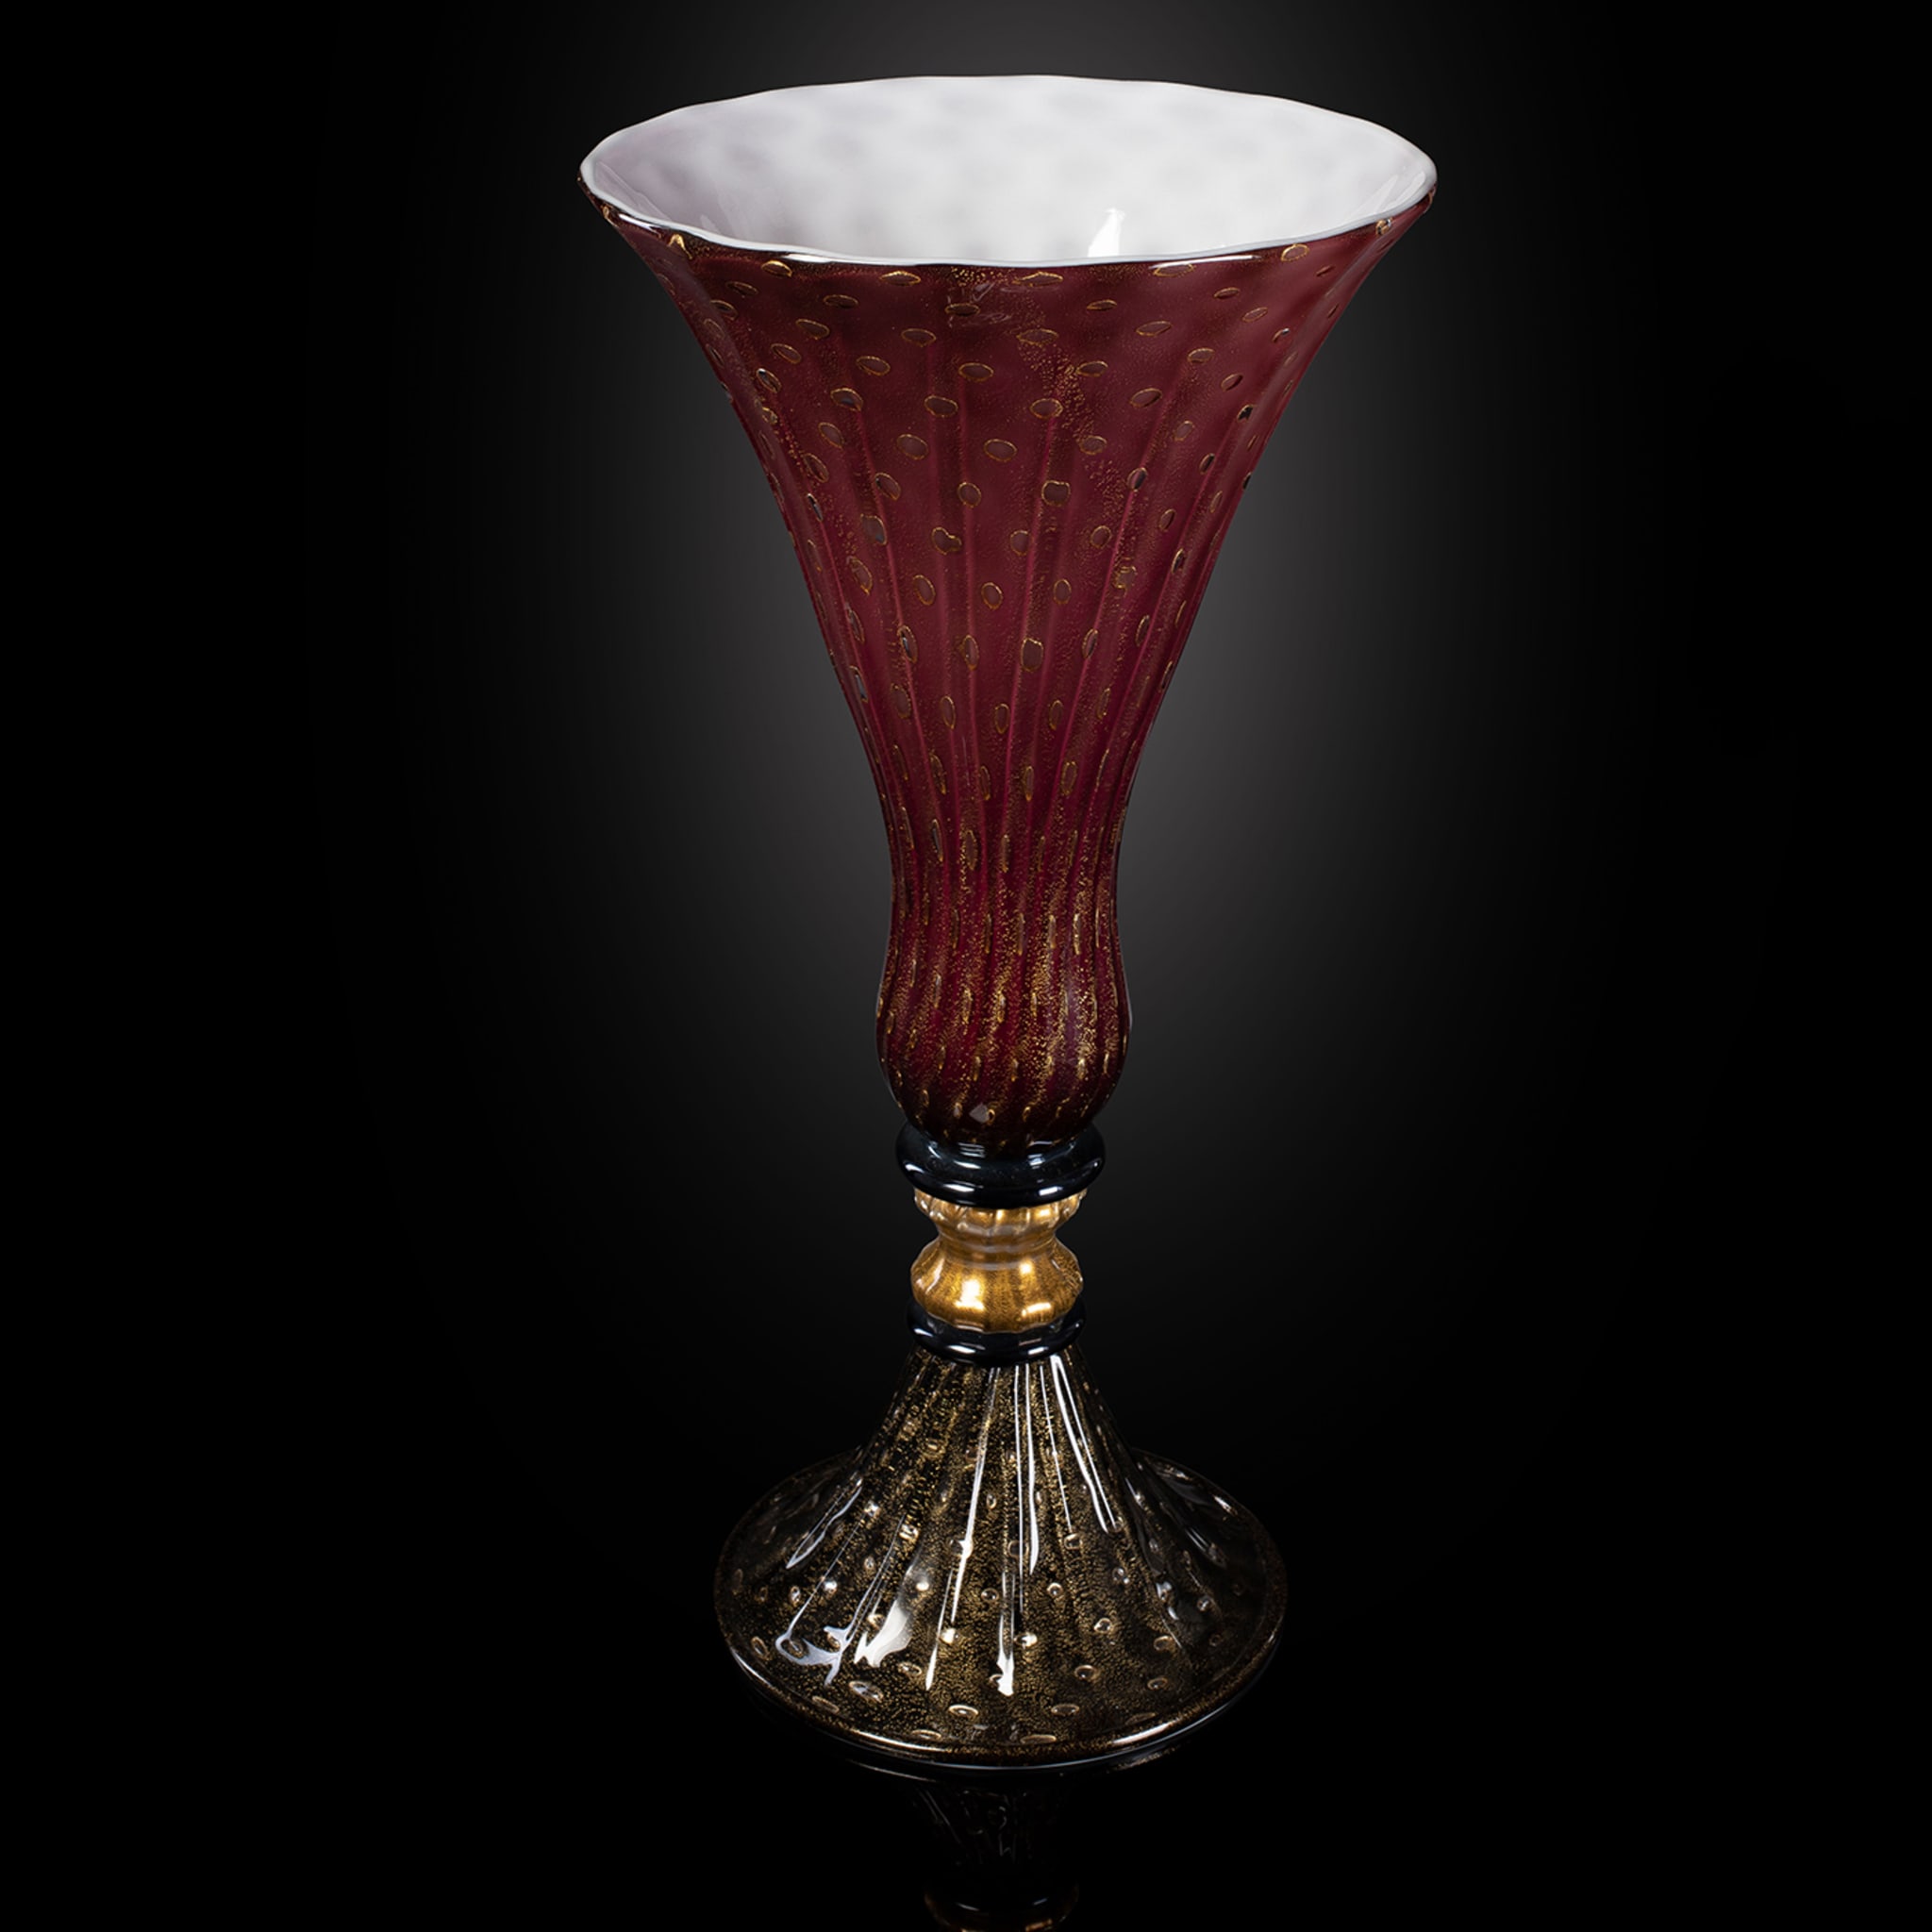 Stmtrub Ruby & Gold Footed Vase - Alternative view 4